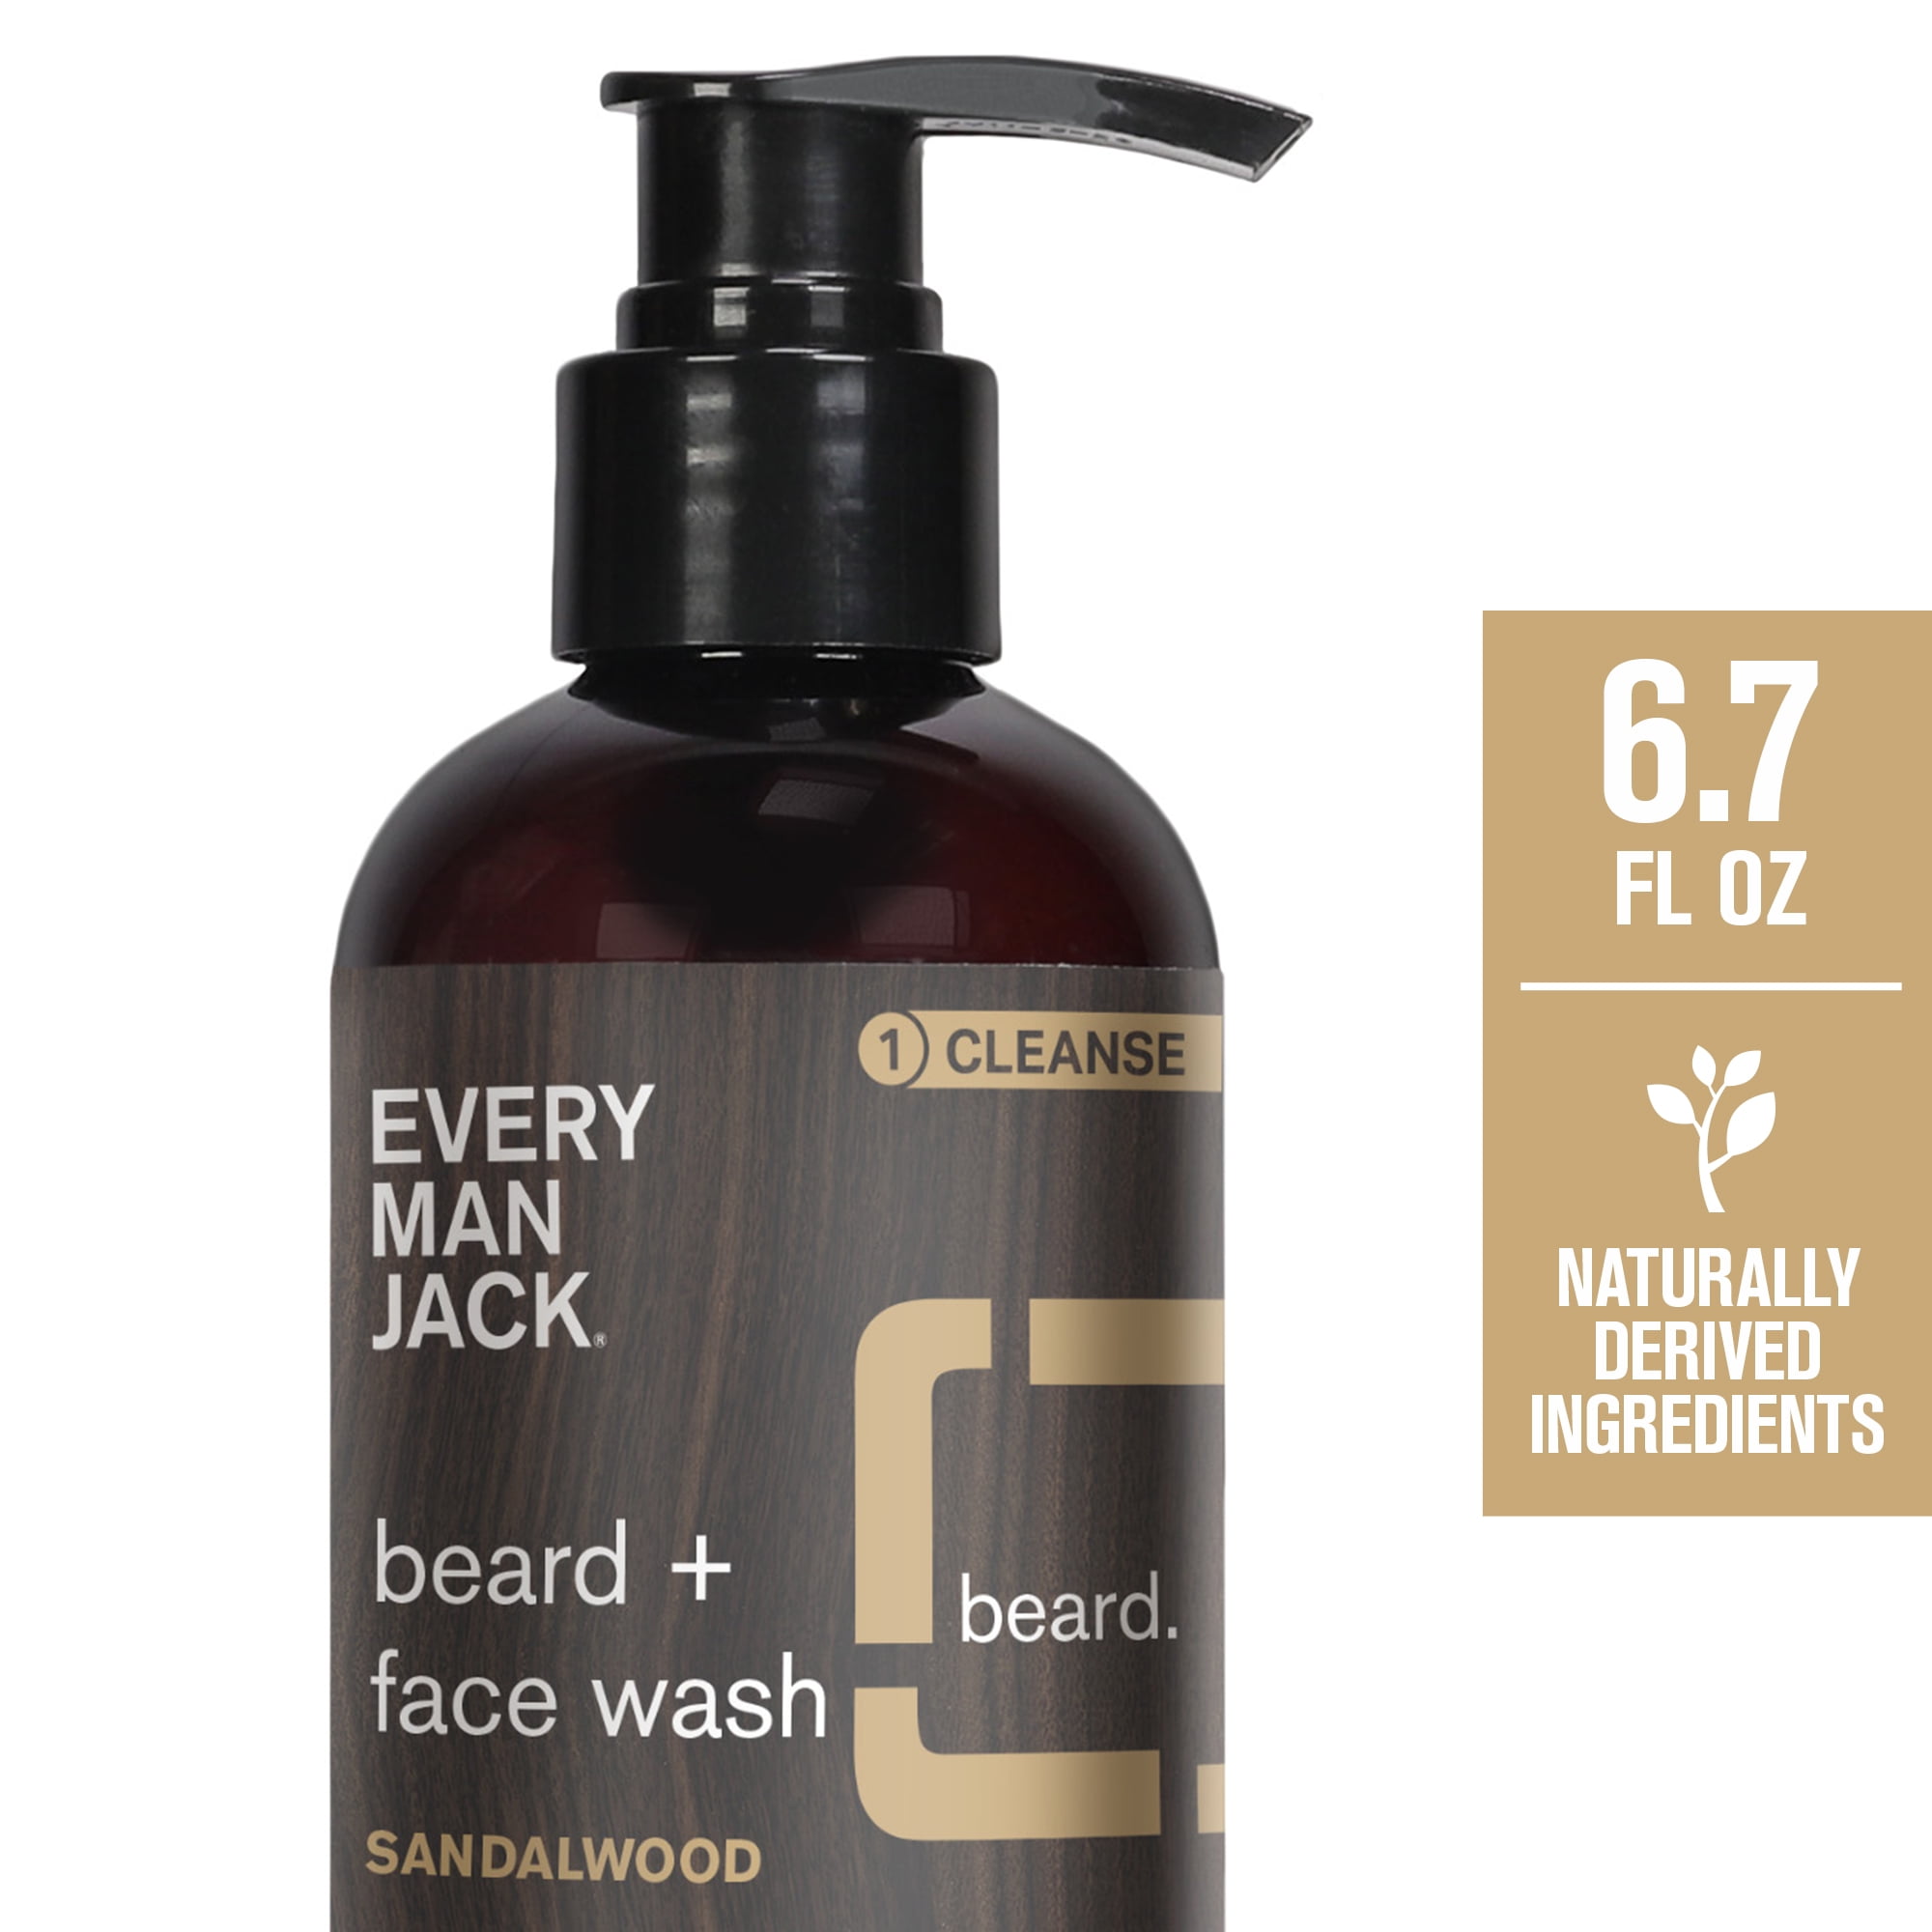 Every Man Jack Sandalwood Beard and Face Wash for Men, Naturally Derived, 6.7 fl oz